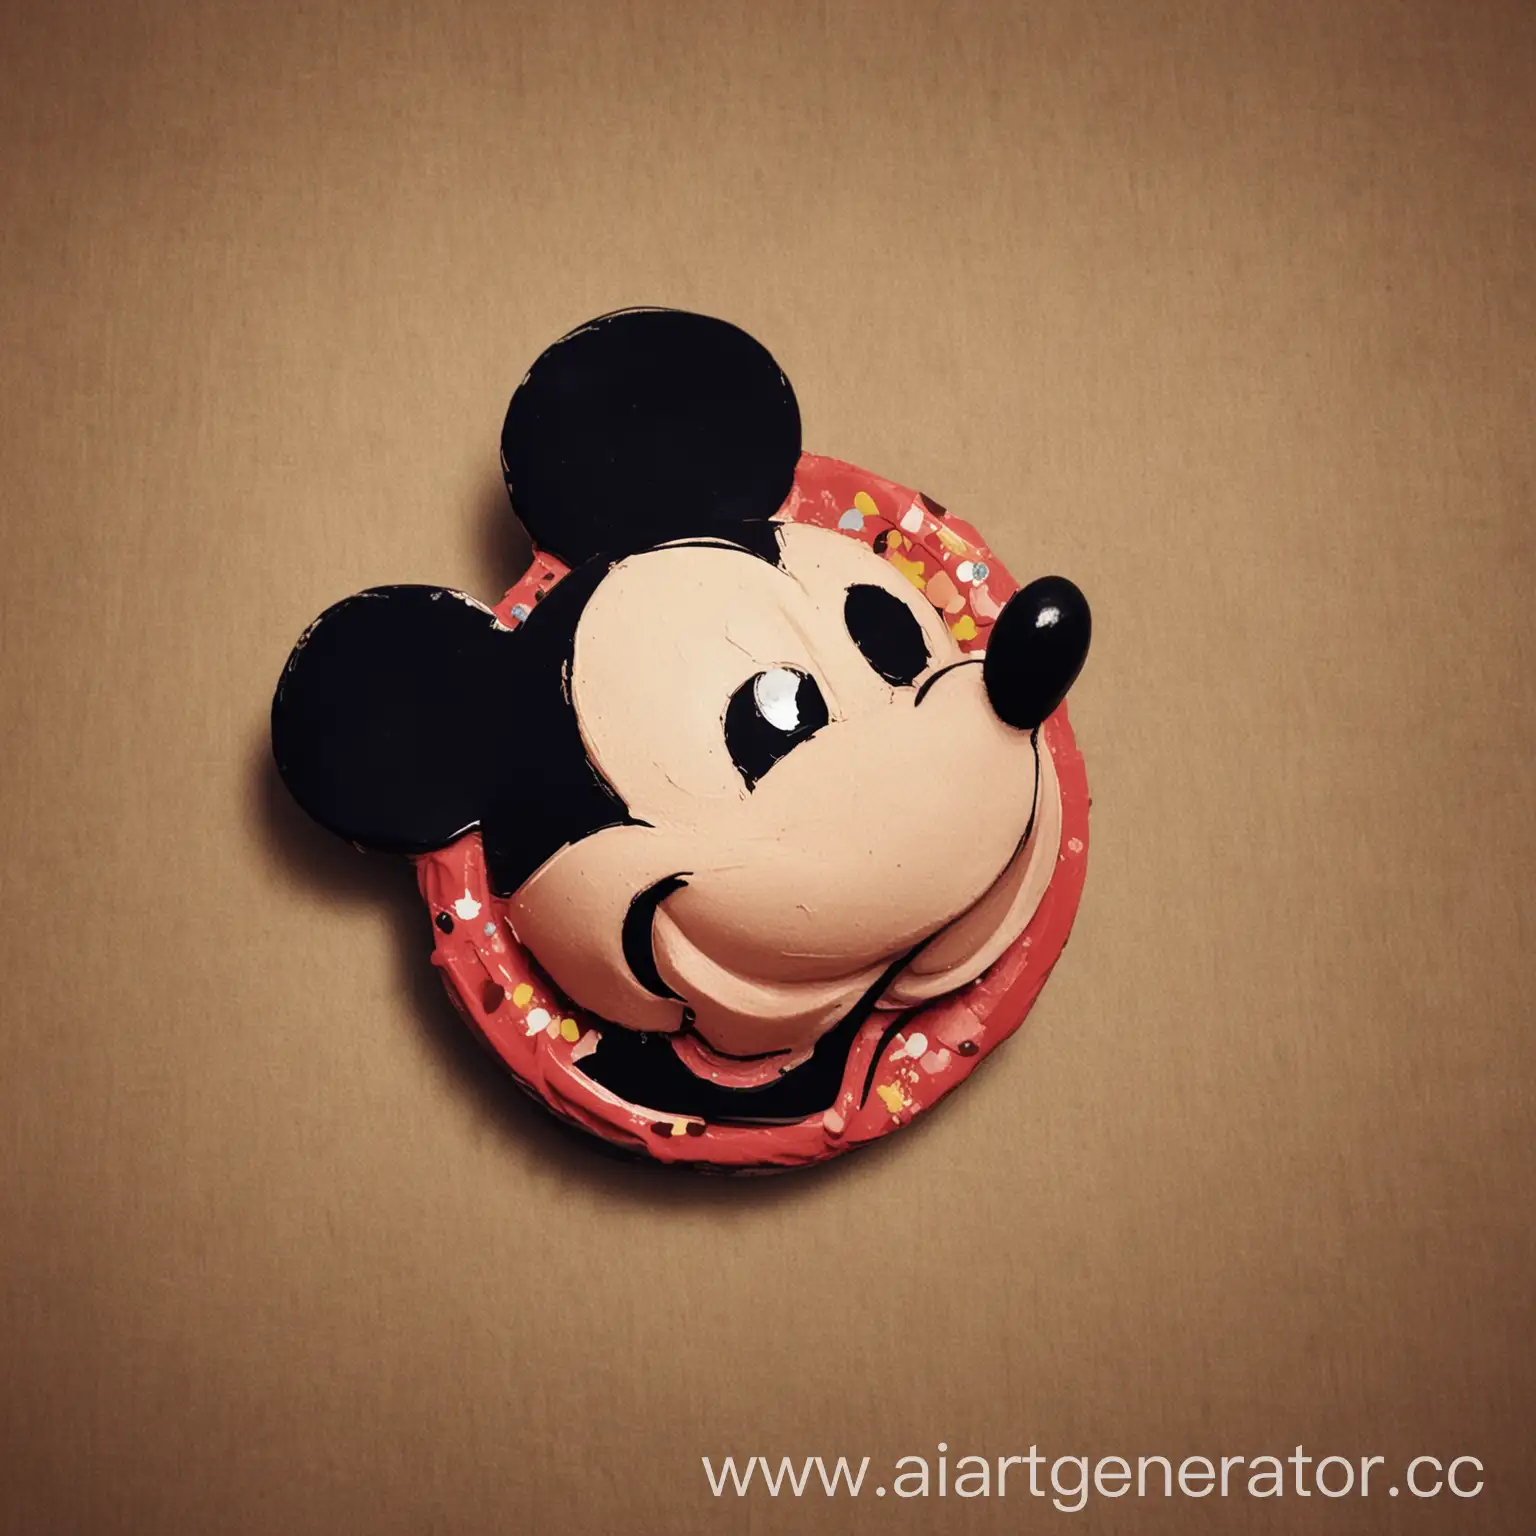 Classic-Mickey-Mouse-Cartoon-Character-Portrait